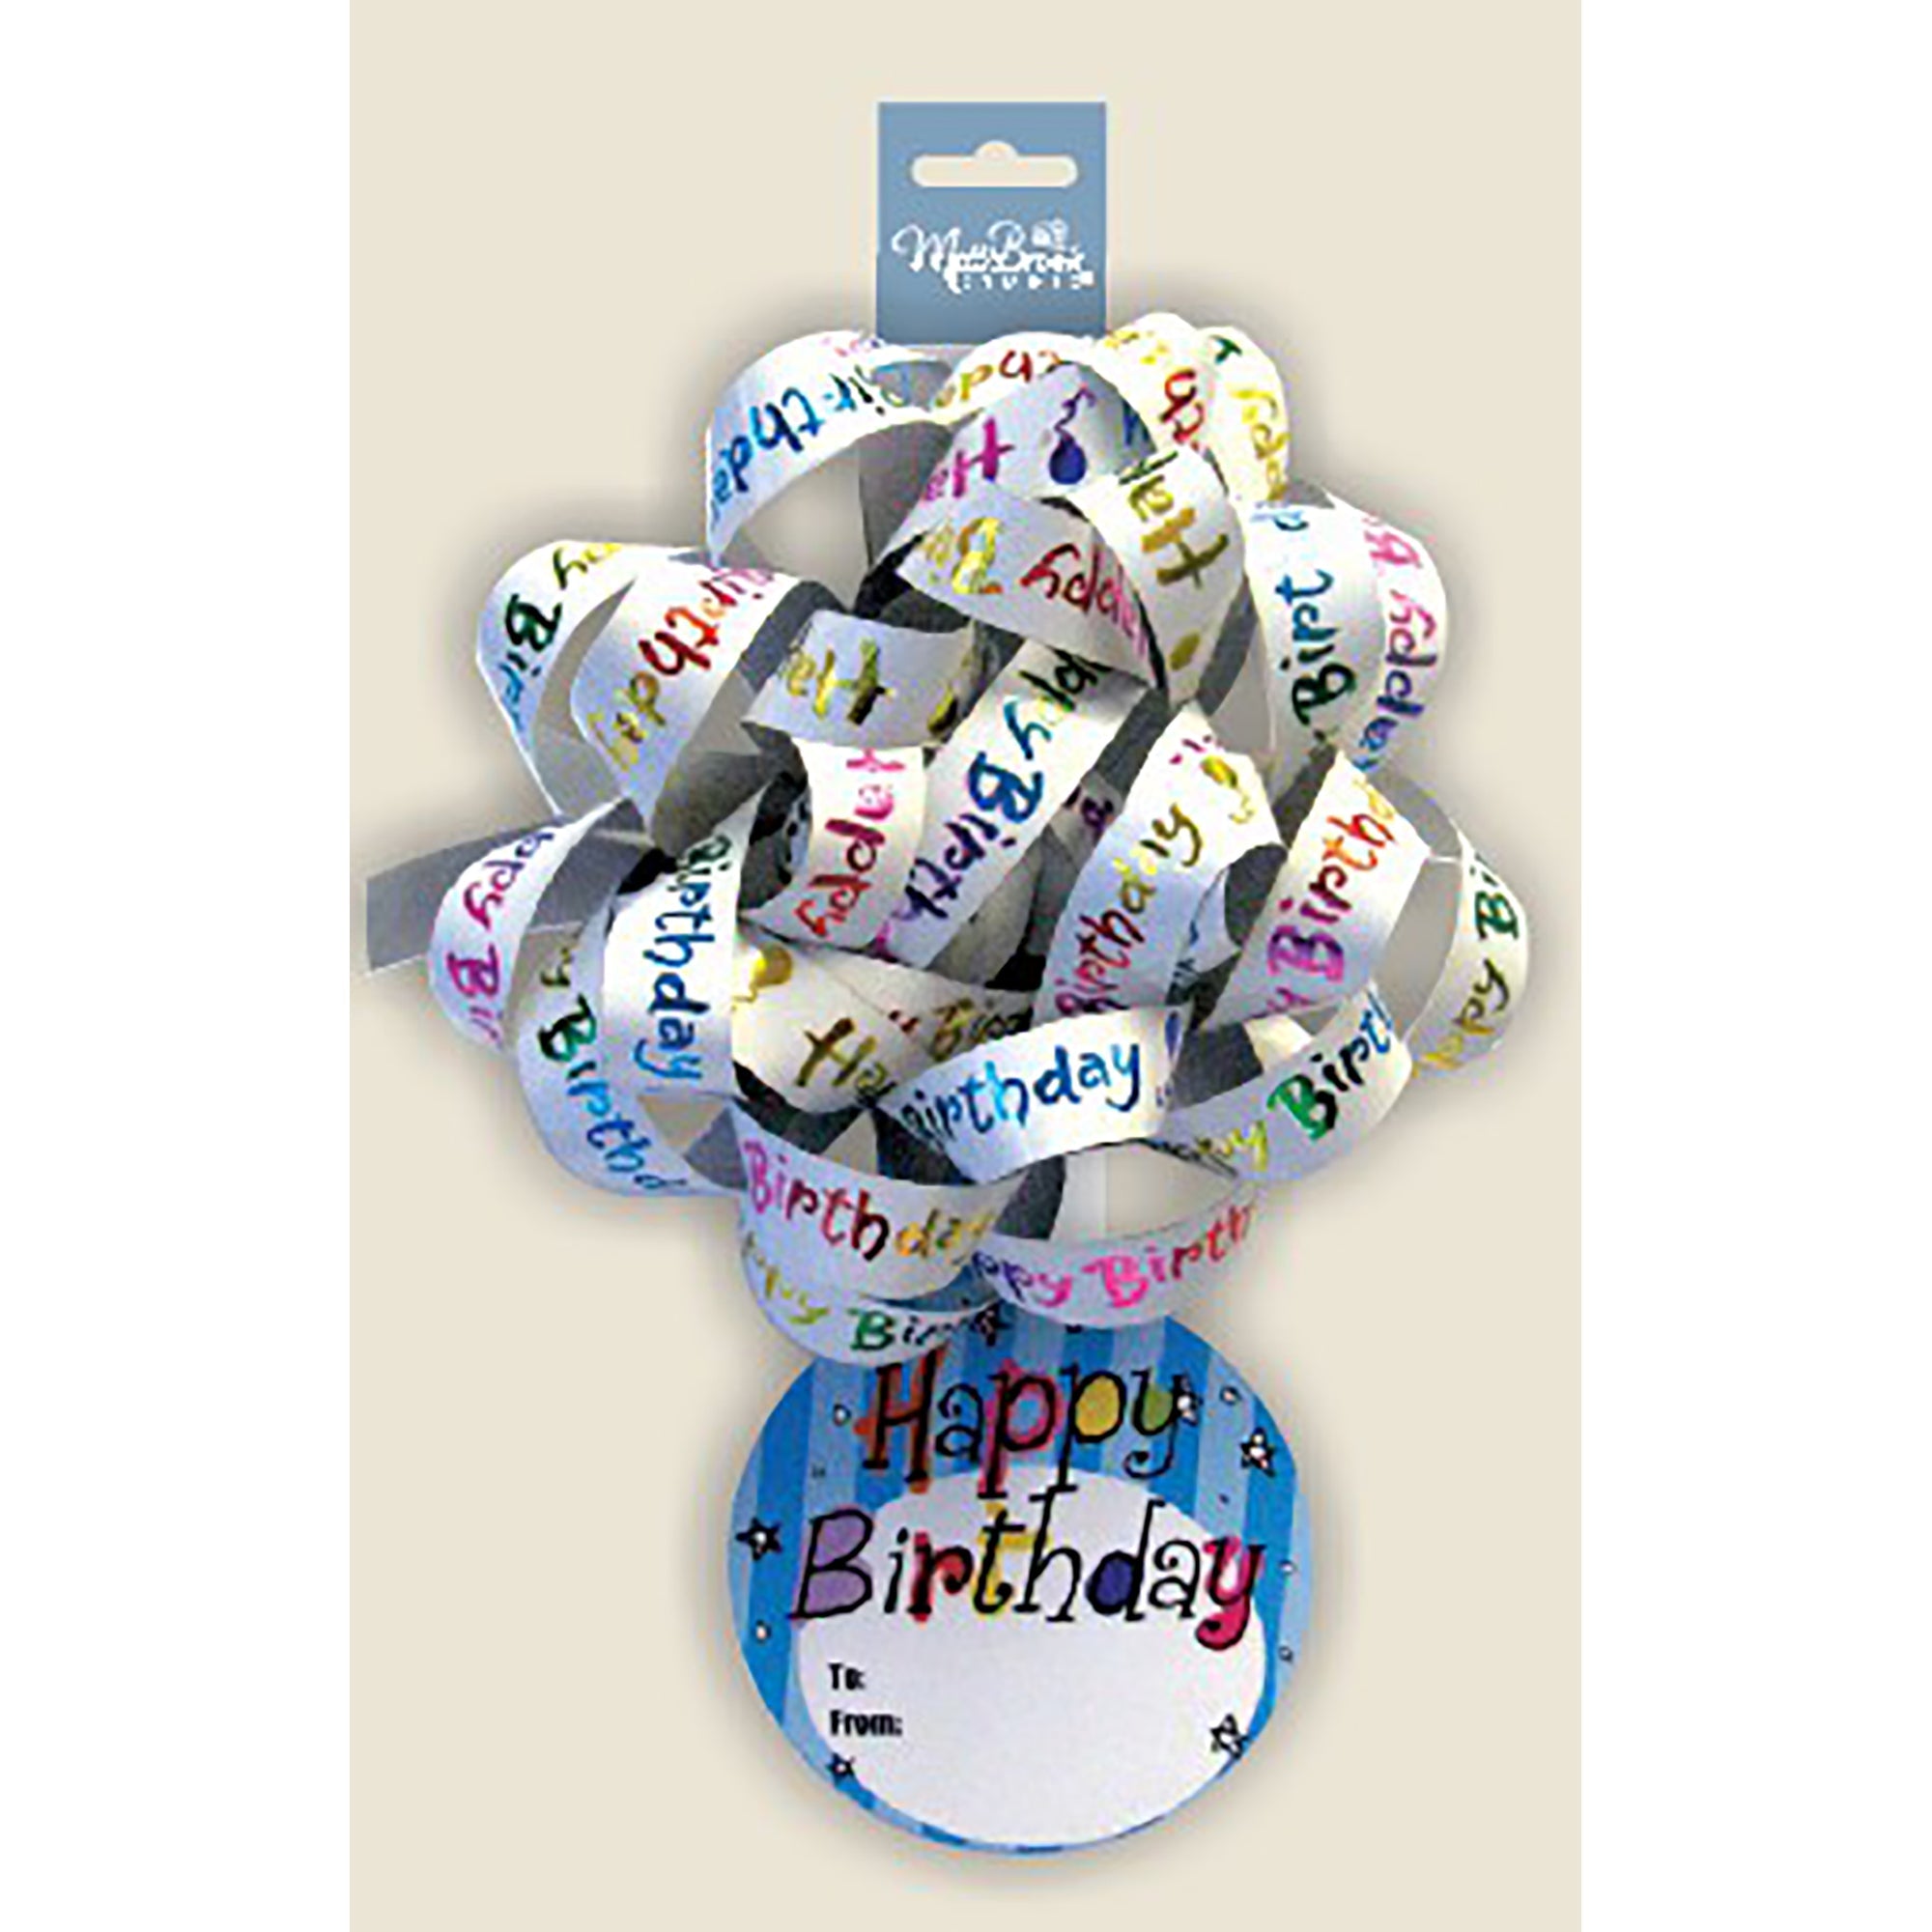 Mill Brook Bow with Tag Happy Birthday - White 6in